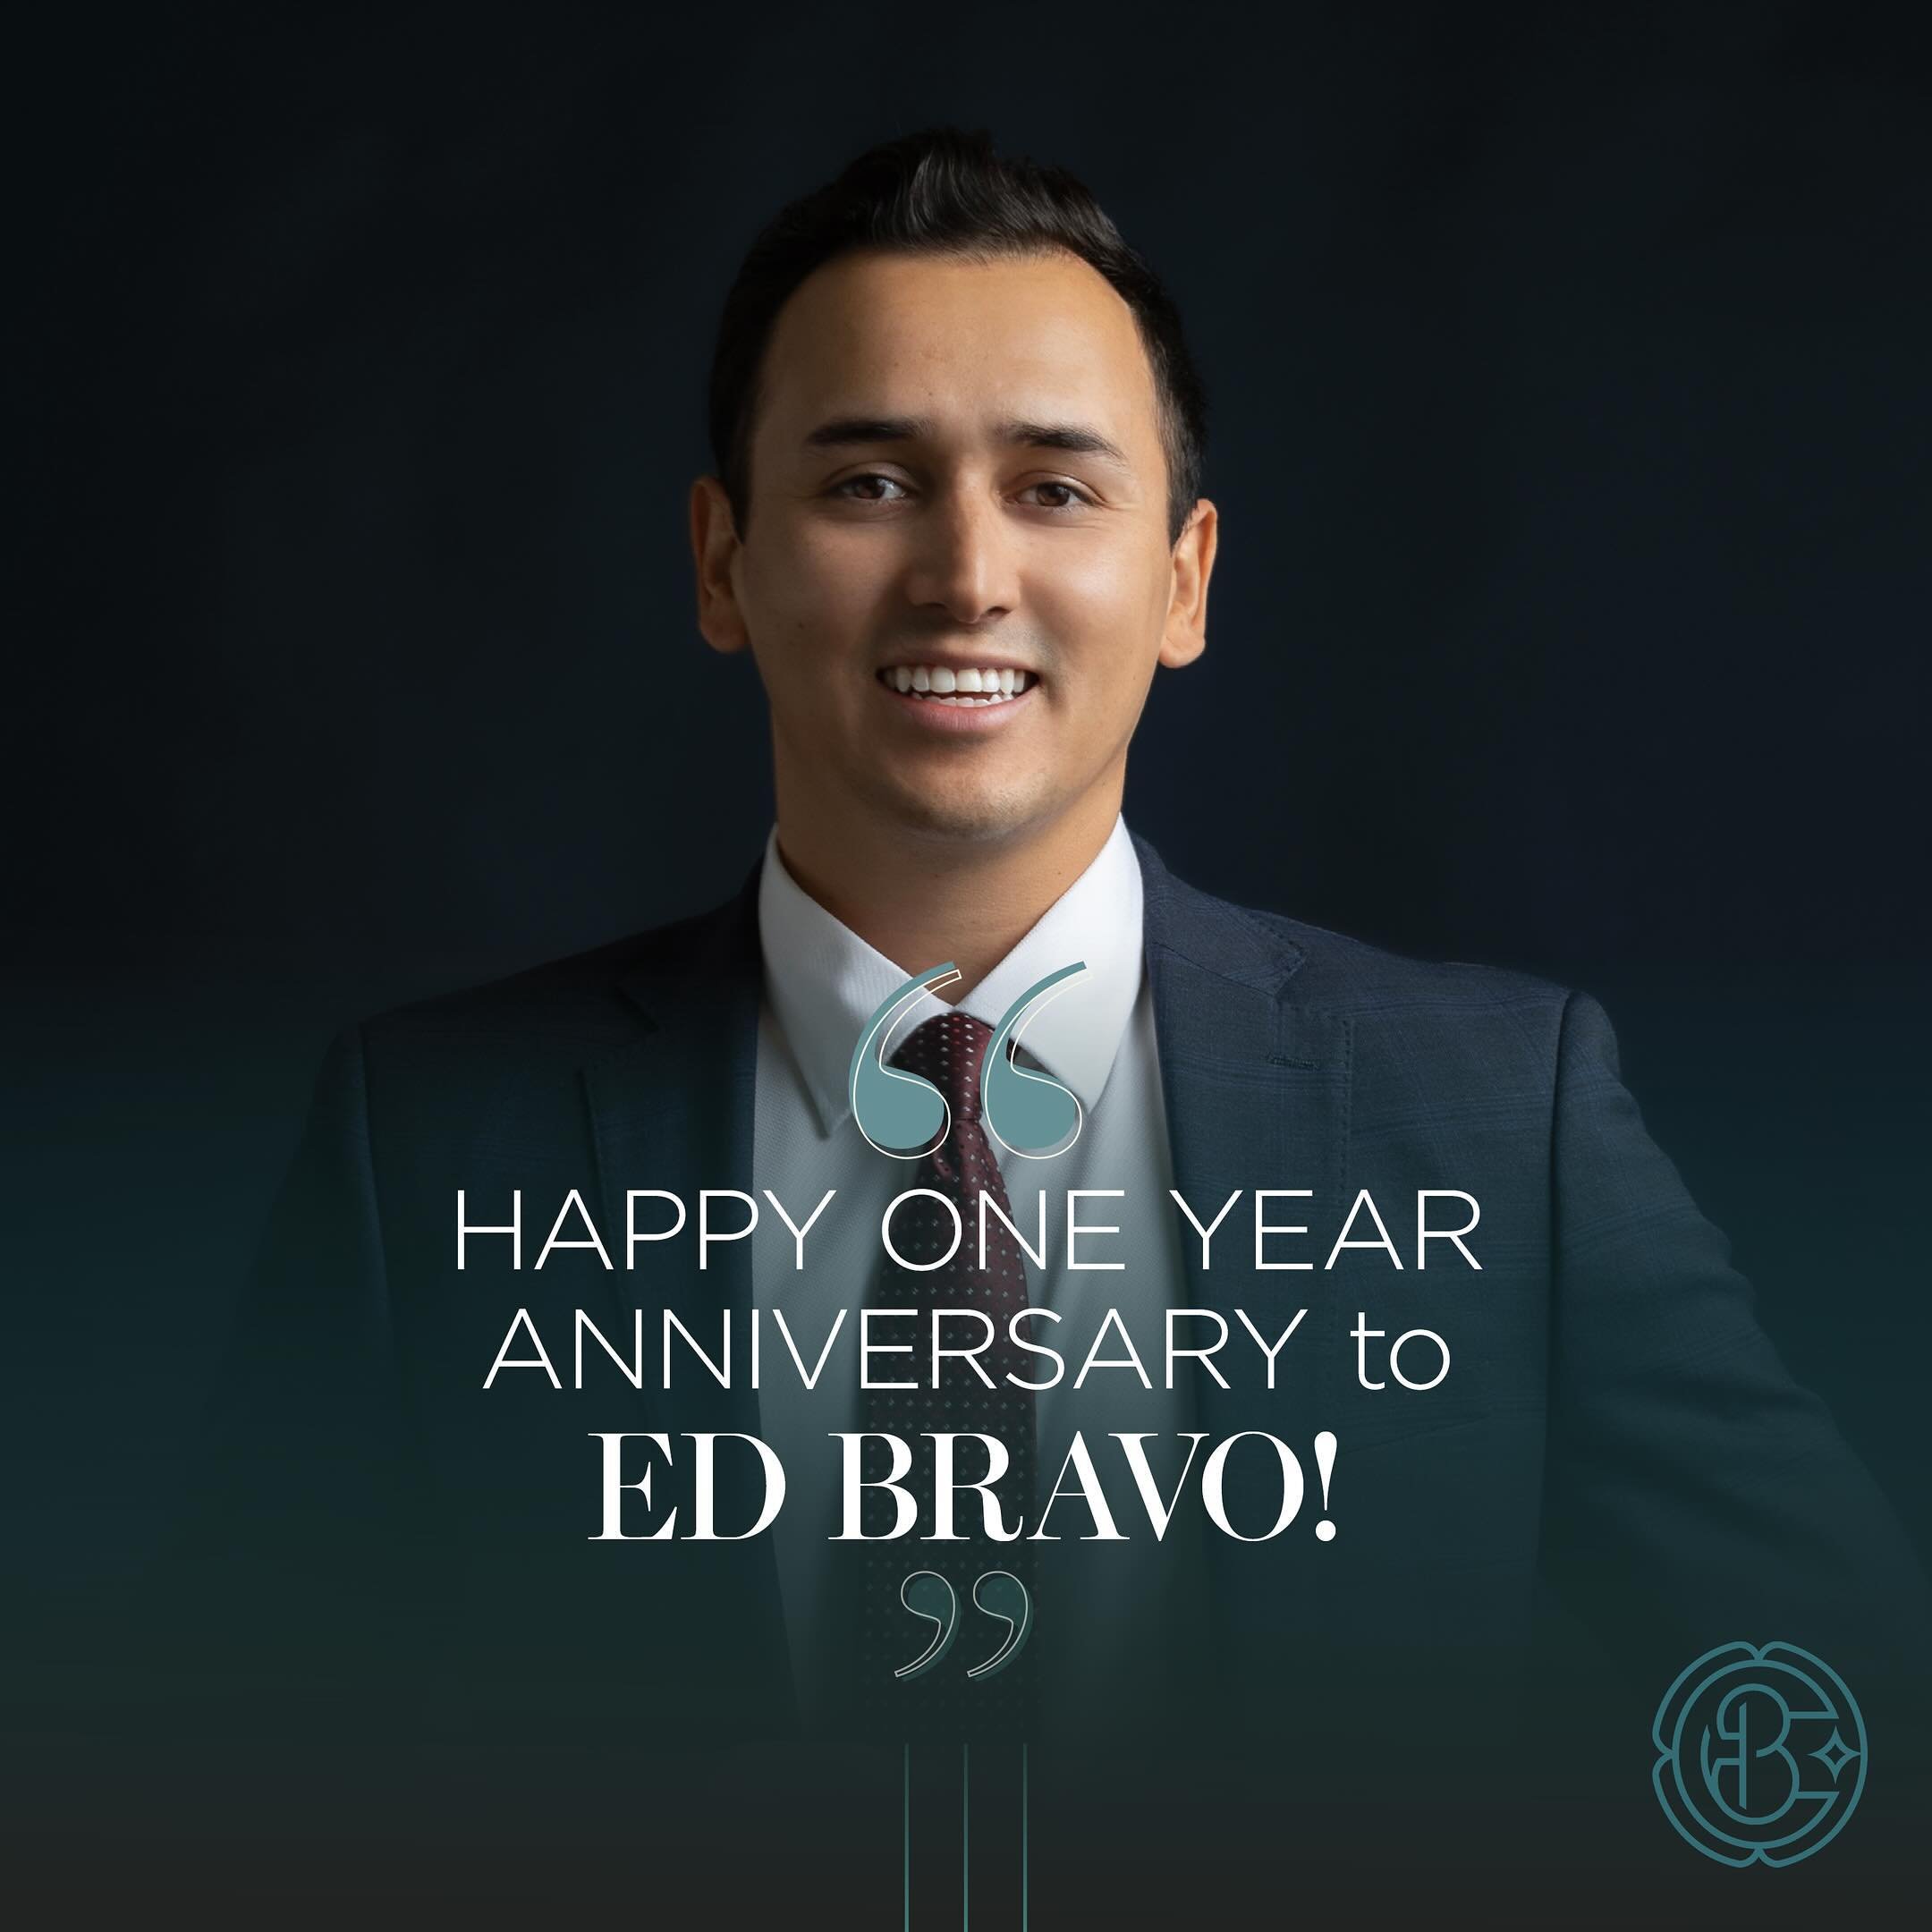 Happy 1-year Craft &amp; Bauerversary to our Estate Agent Ed Bravo! ⁠
⁠
Serving the areas of West LA, Beverly Hills, Central LA, DTLA, Pasadena, and the Valley. Ed provides the best possible service to his clients by tailoring his efforts and focus t